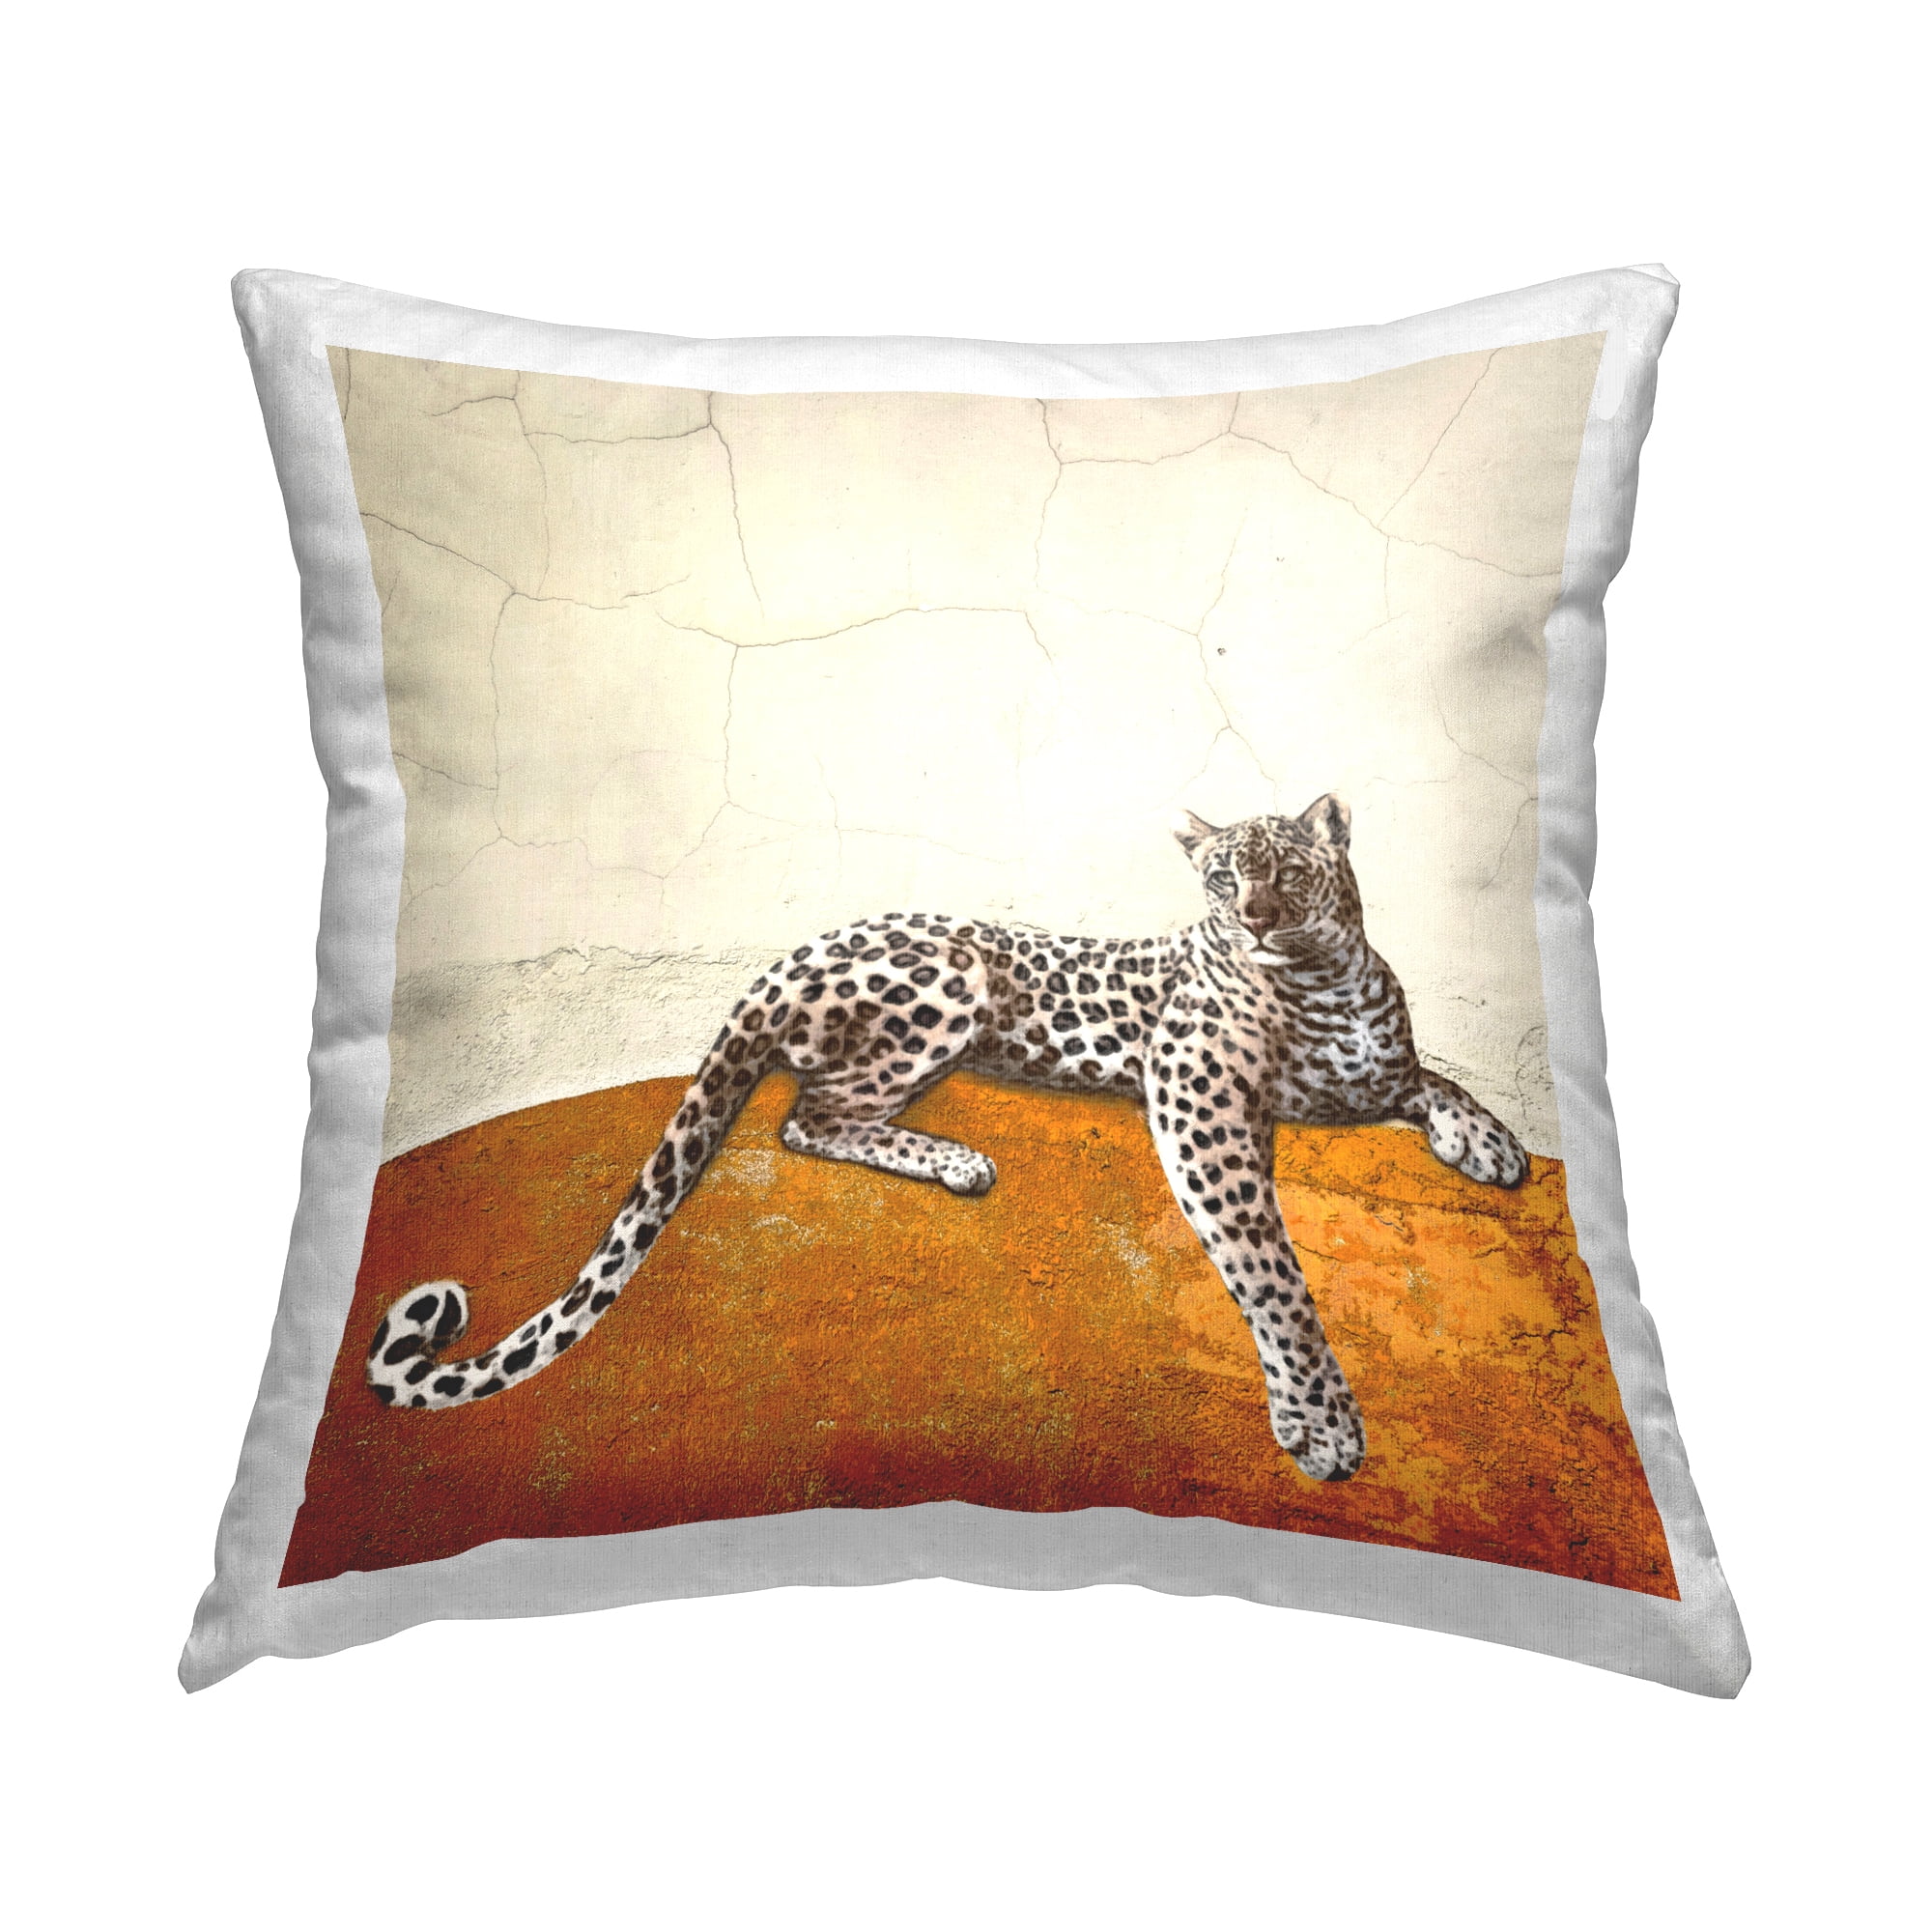 Stupell Industries Lounging Leopard Modern Wildlife Printed Throw